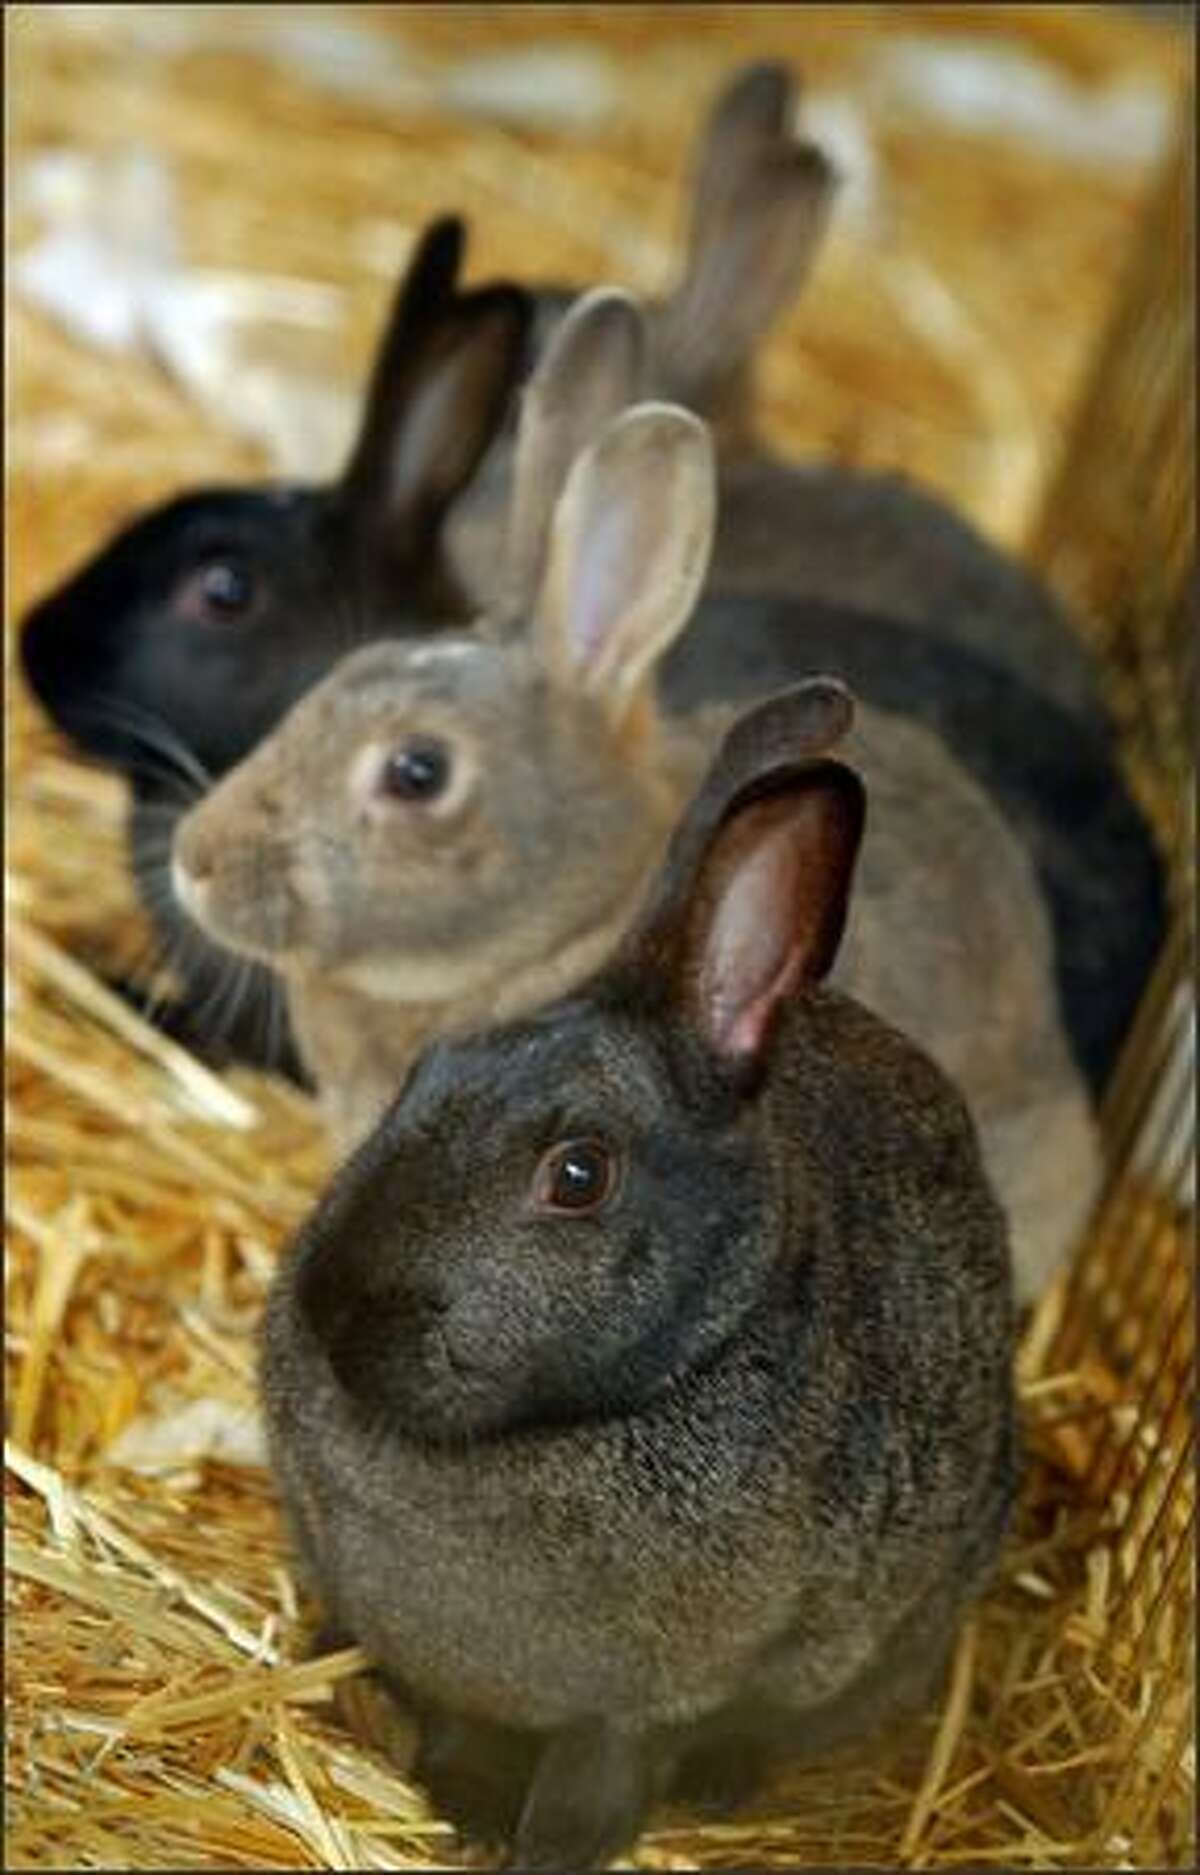 Four Woodland Park female rabbits await their fate in a holding pen at Magnuson Park after they were captured Tuesday.